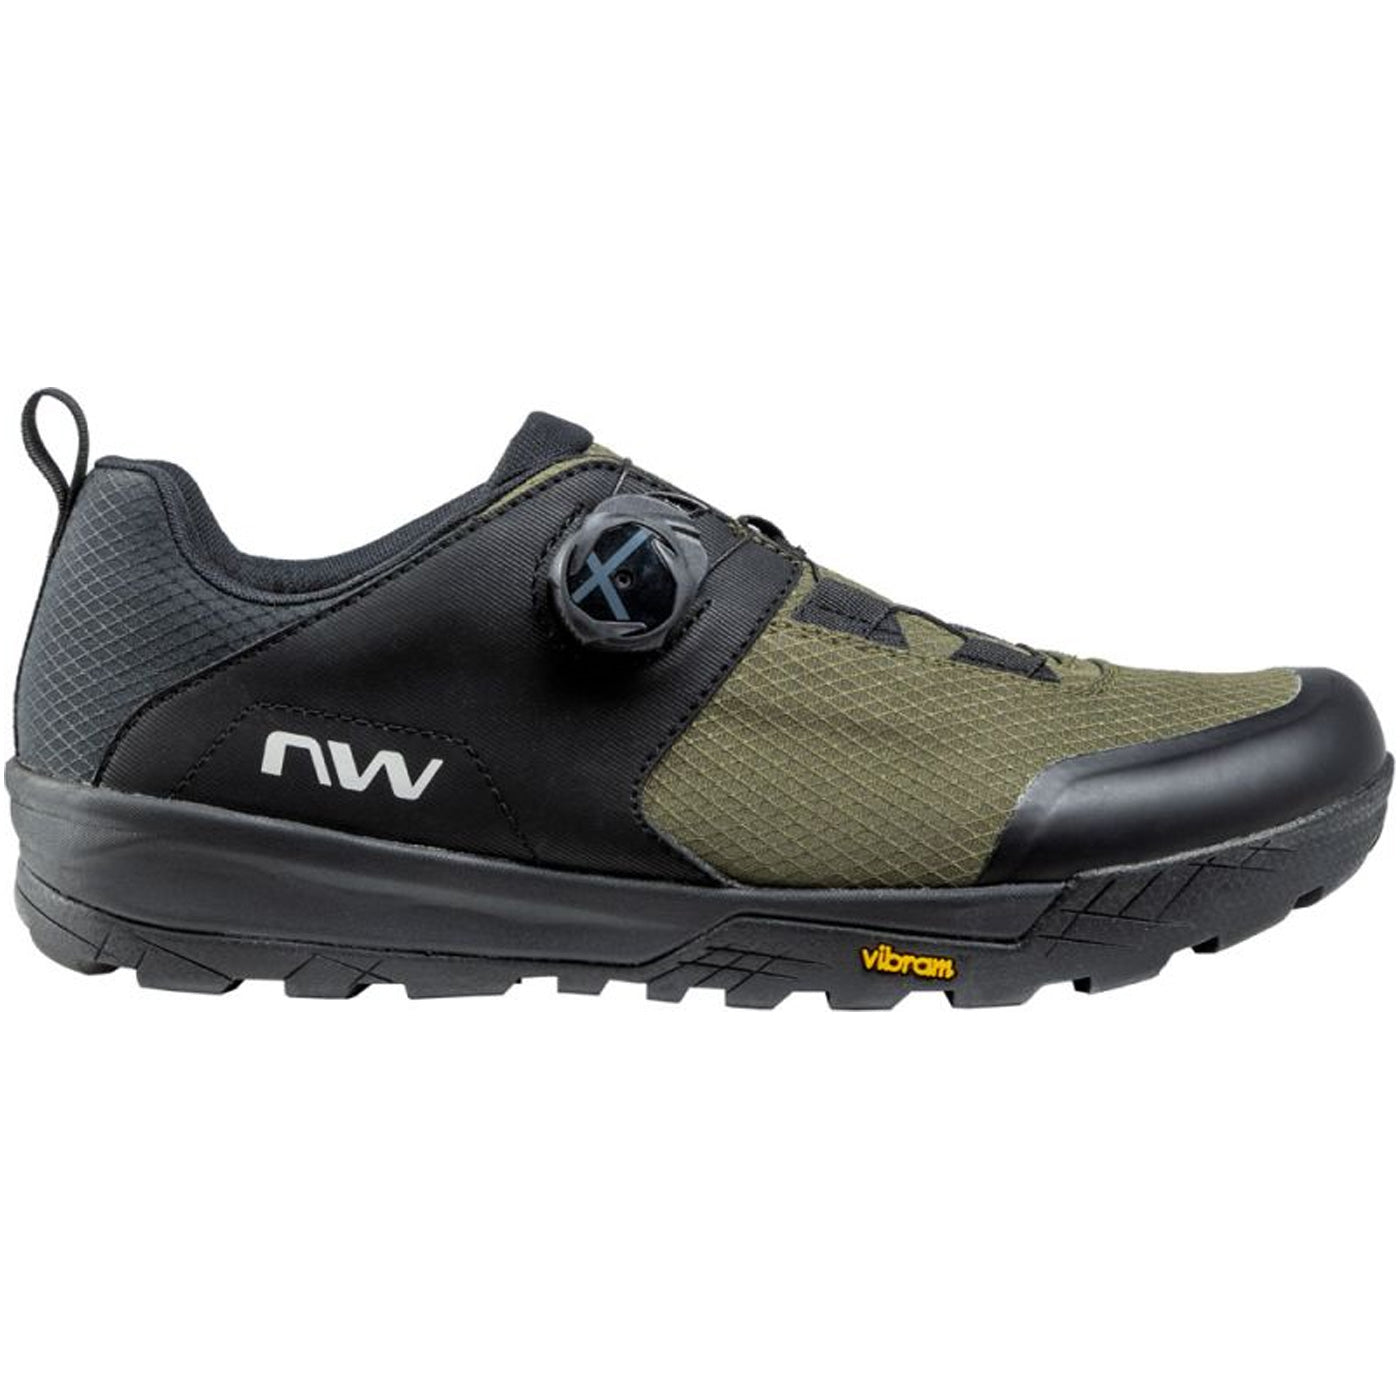 MTB Northwave Rockit Plus shoes - Blue | All4cycling